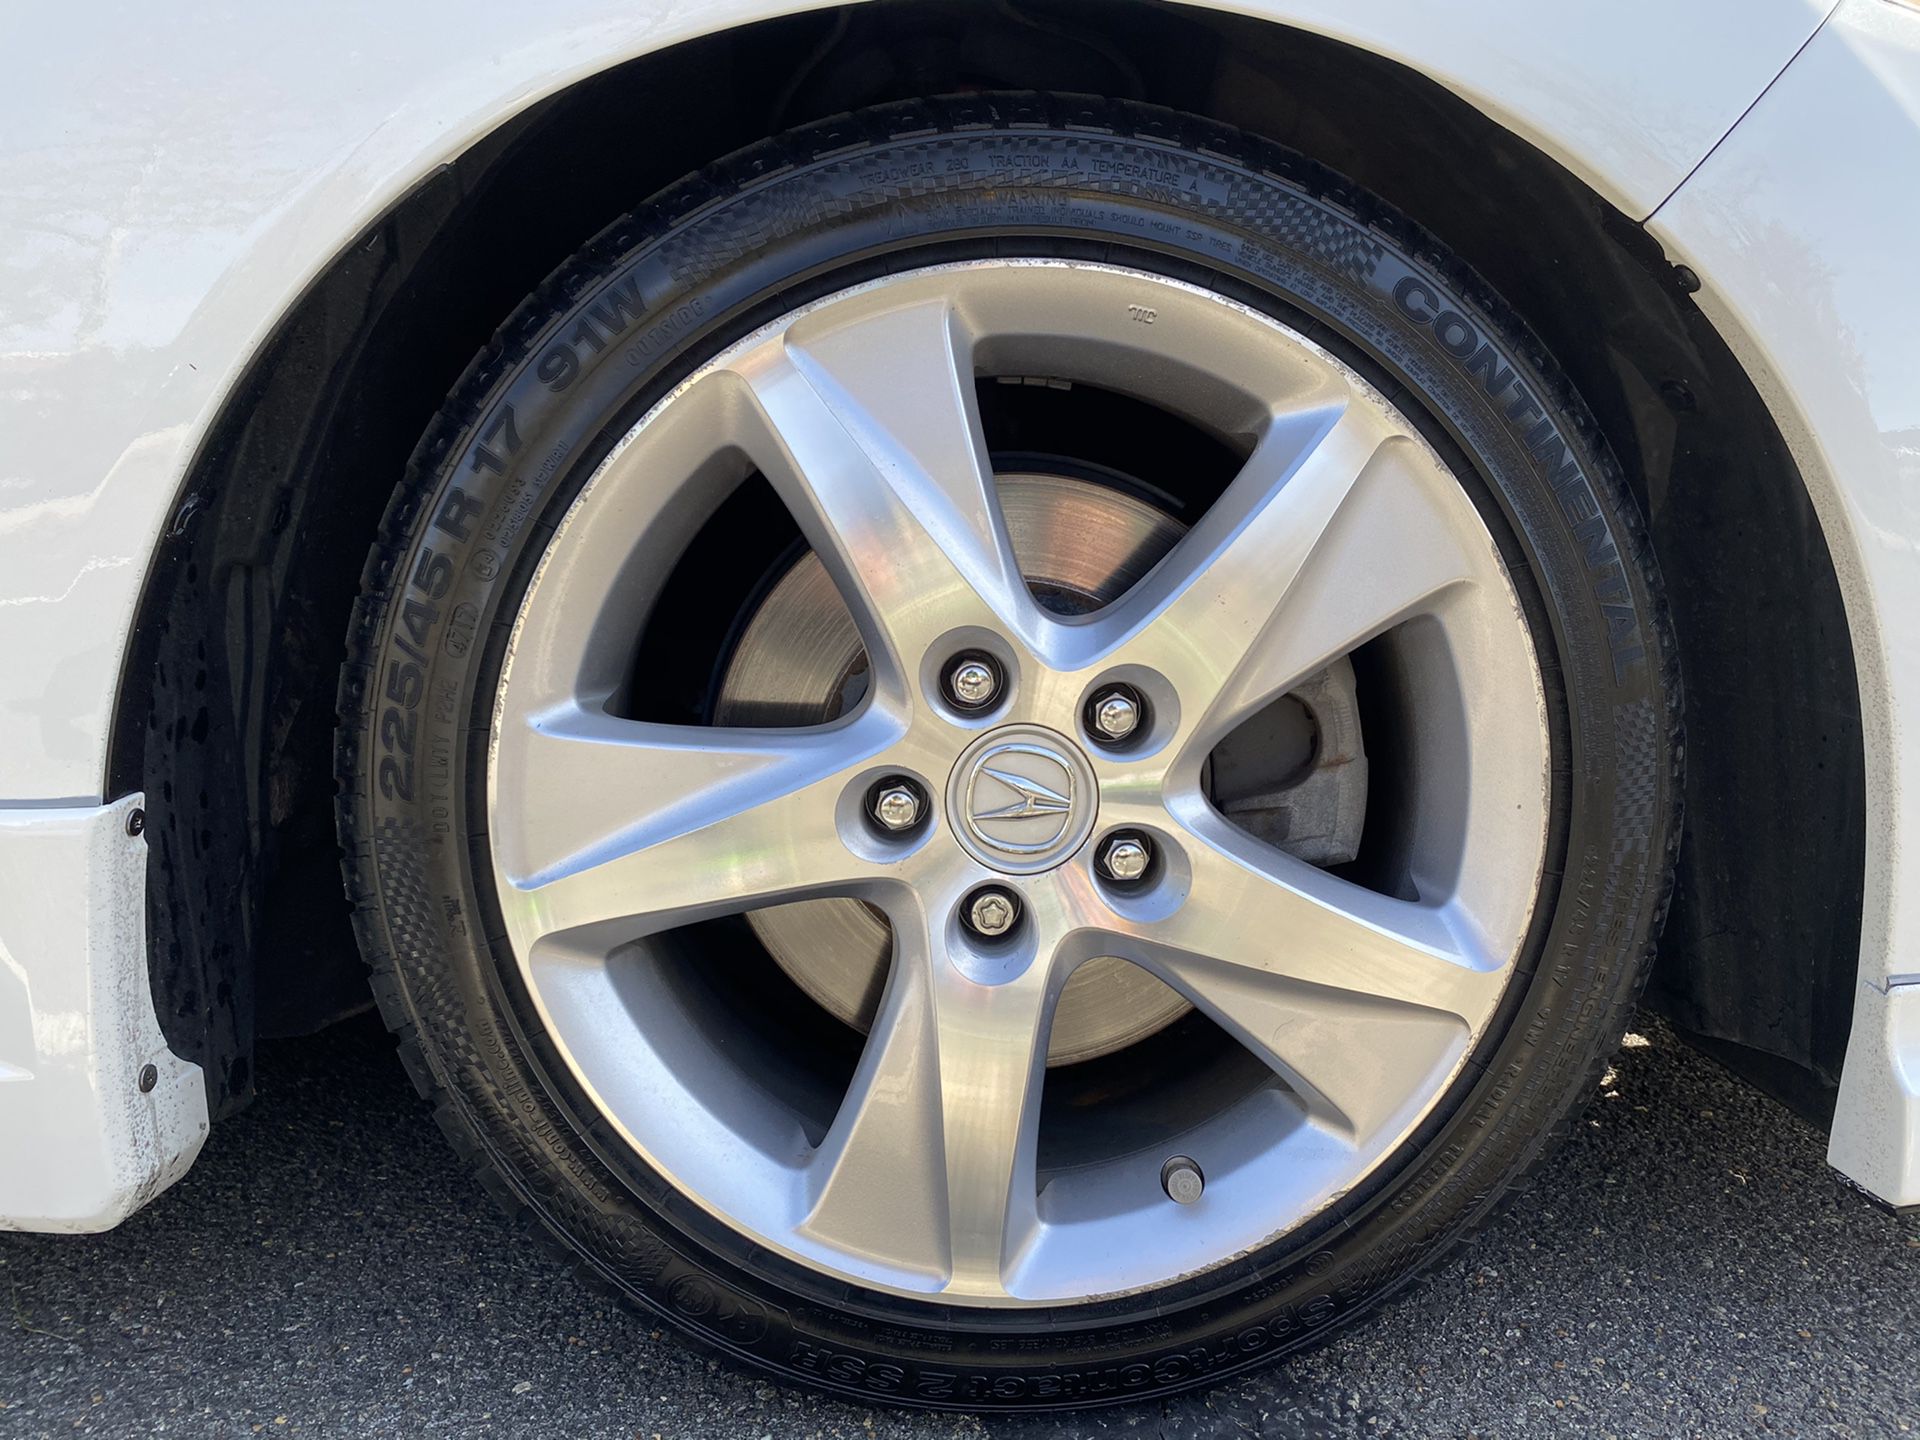 2013 TSX wheels 225/45/17 Continental Sportcontact 2 SSR with TPMS